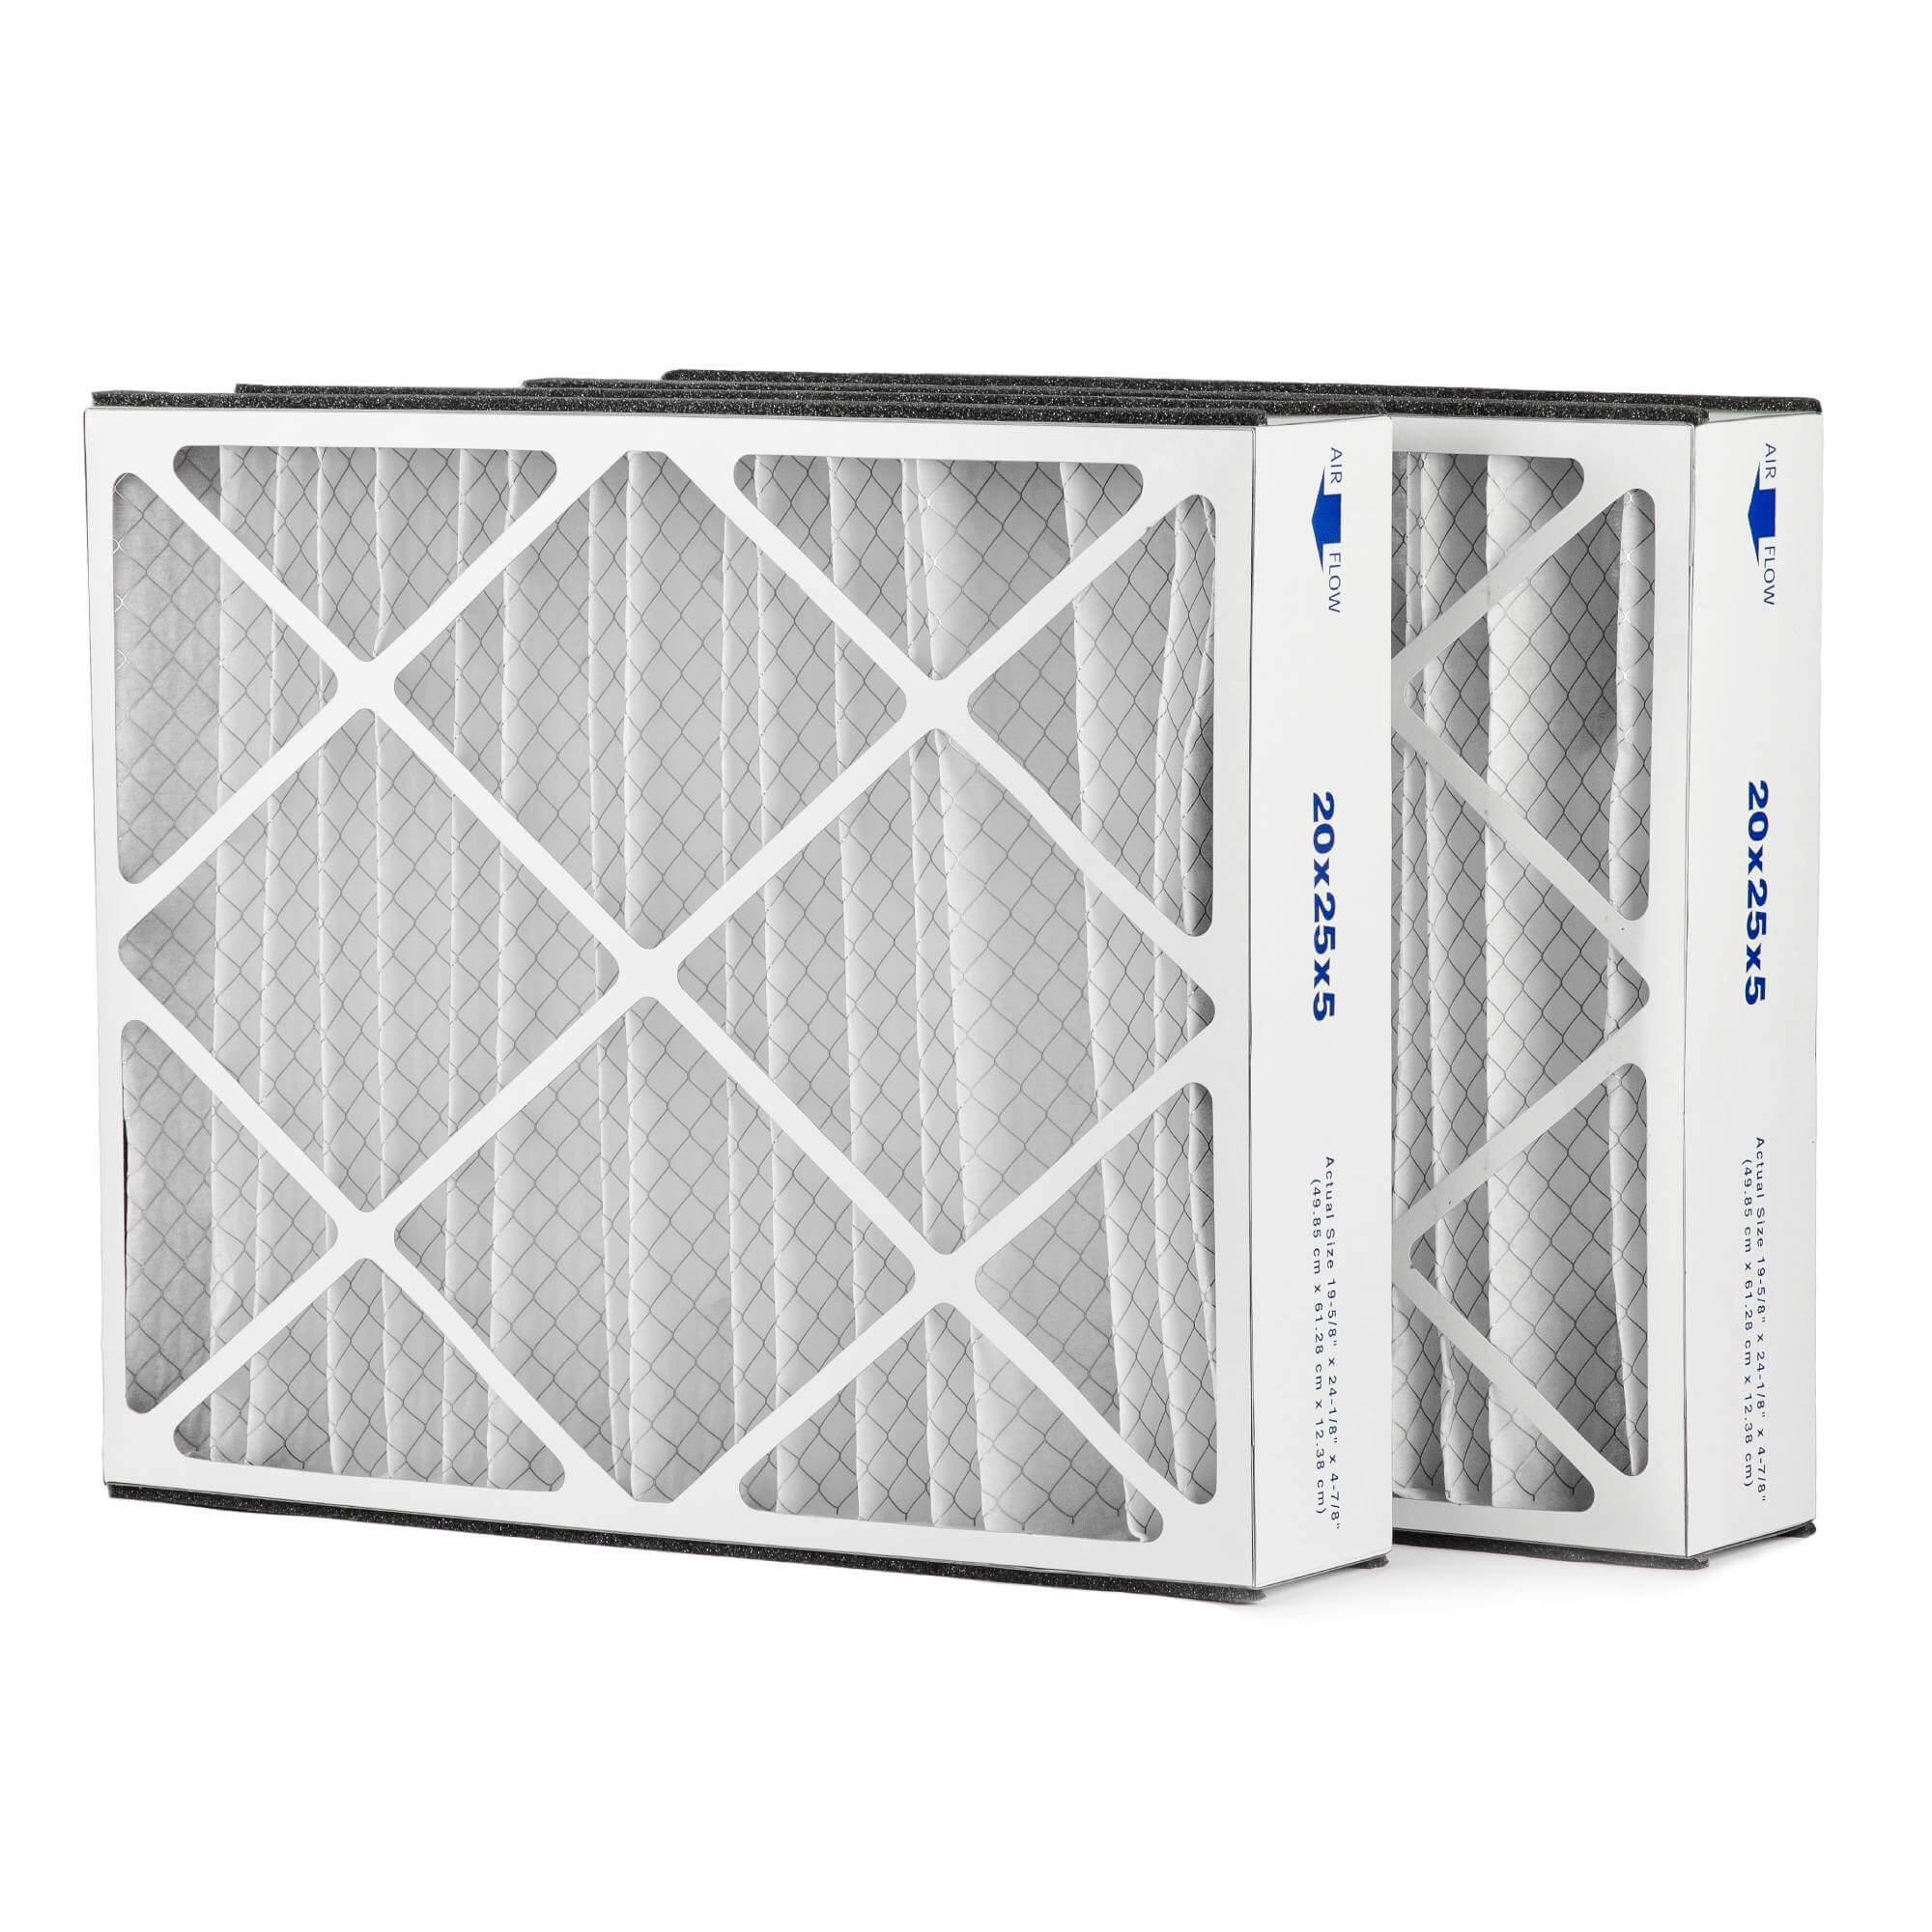 Filters Fast® Replacement for Trion Air Bear 255649-102 20x25x5 MERV 8 Furnace & AC Air Filter - 2-Pack thumbnail